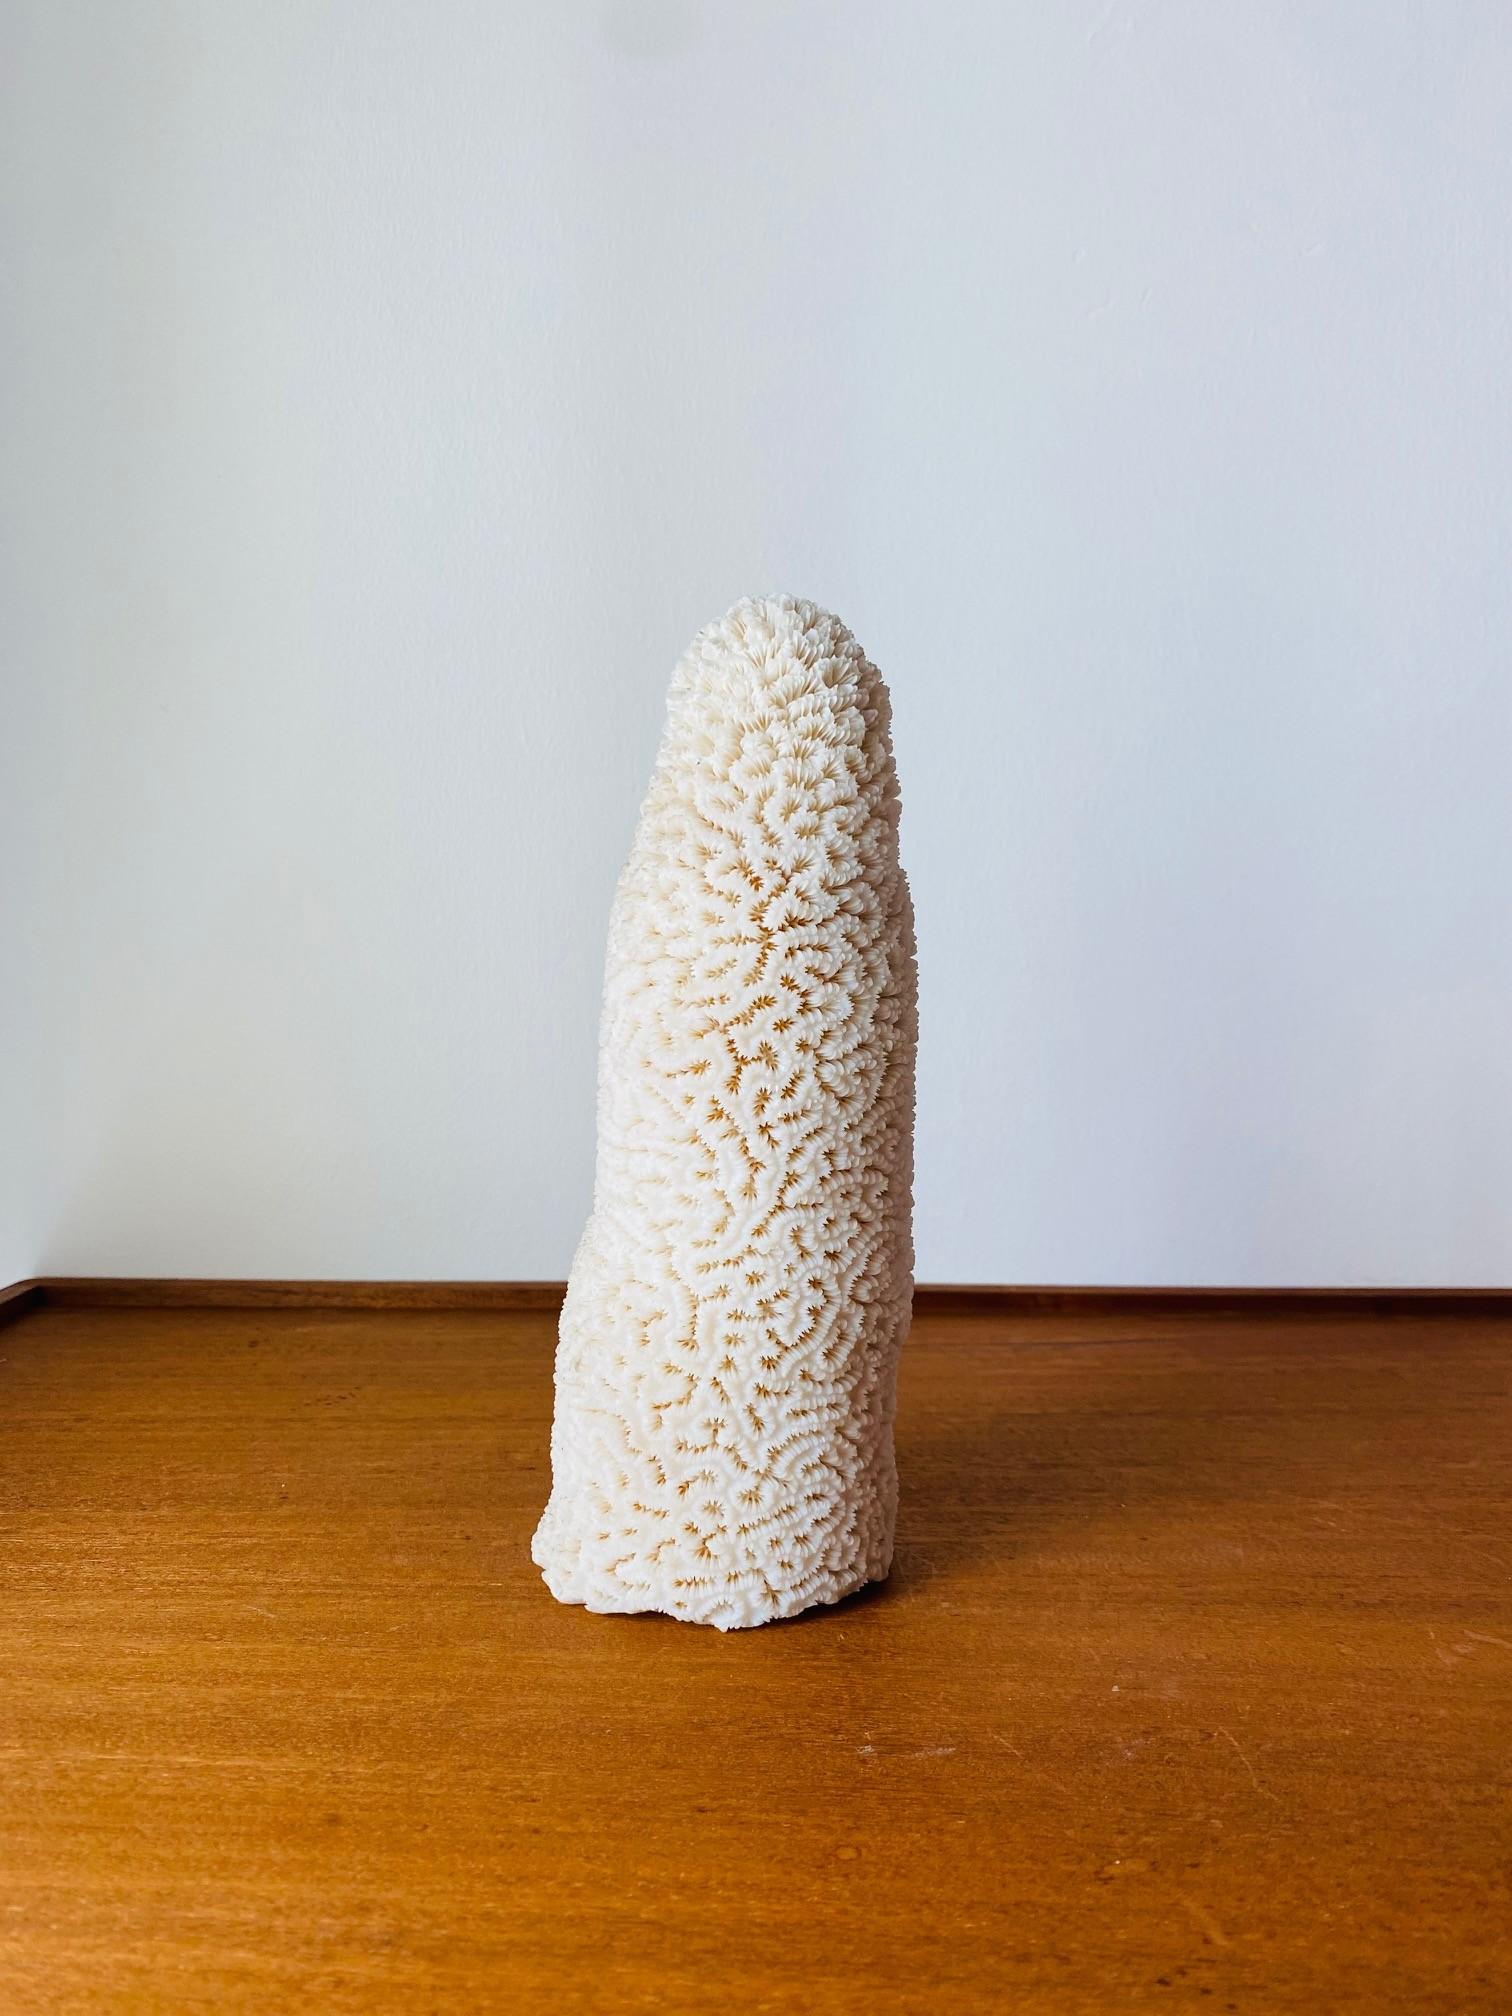 A rare and natural white sea coral specimen, circa 1970s. This enticing piece of natural sea coral takes on the form of a modern sculpture with its sensual form and glow. The piece has no damage  and it stands on its own.  Linear organic beauty.